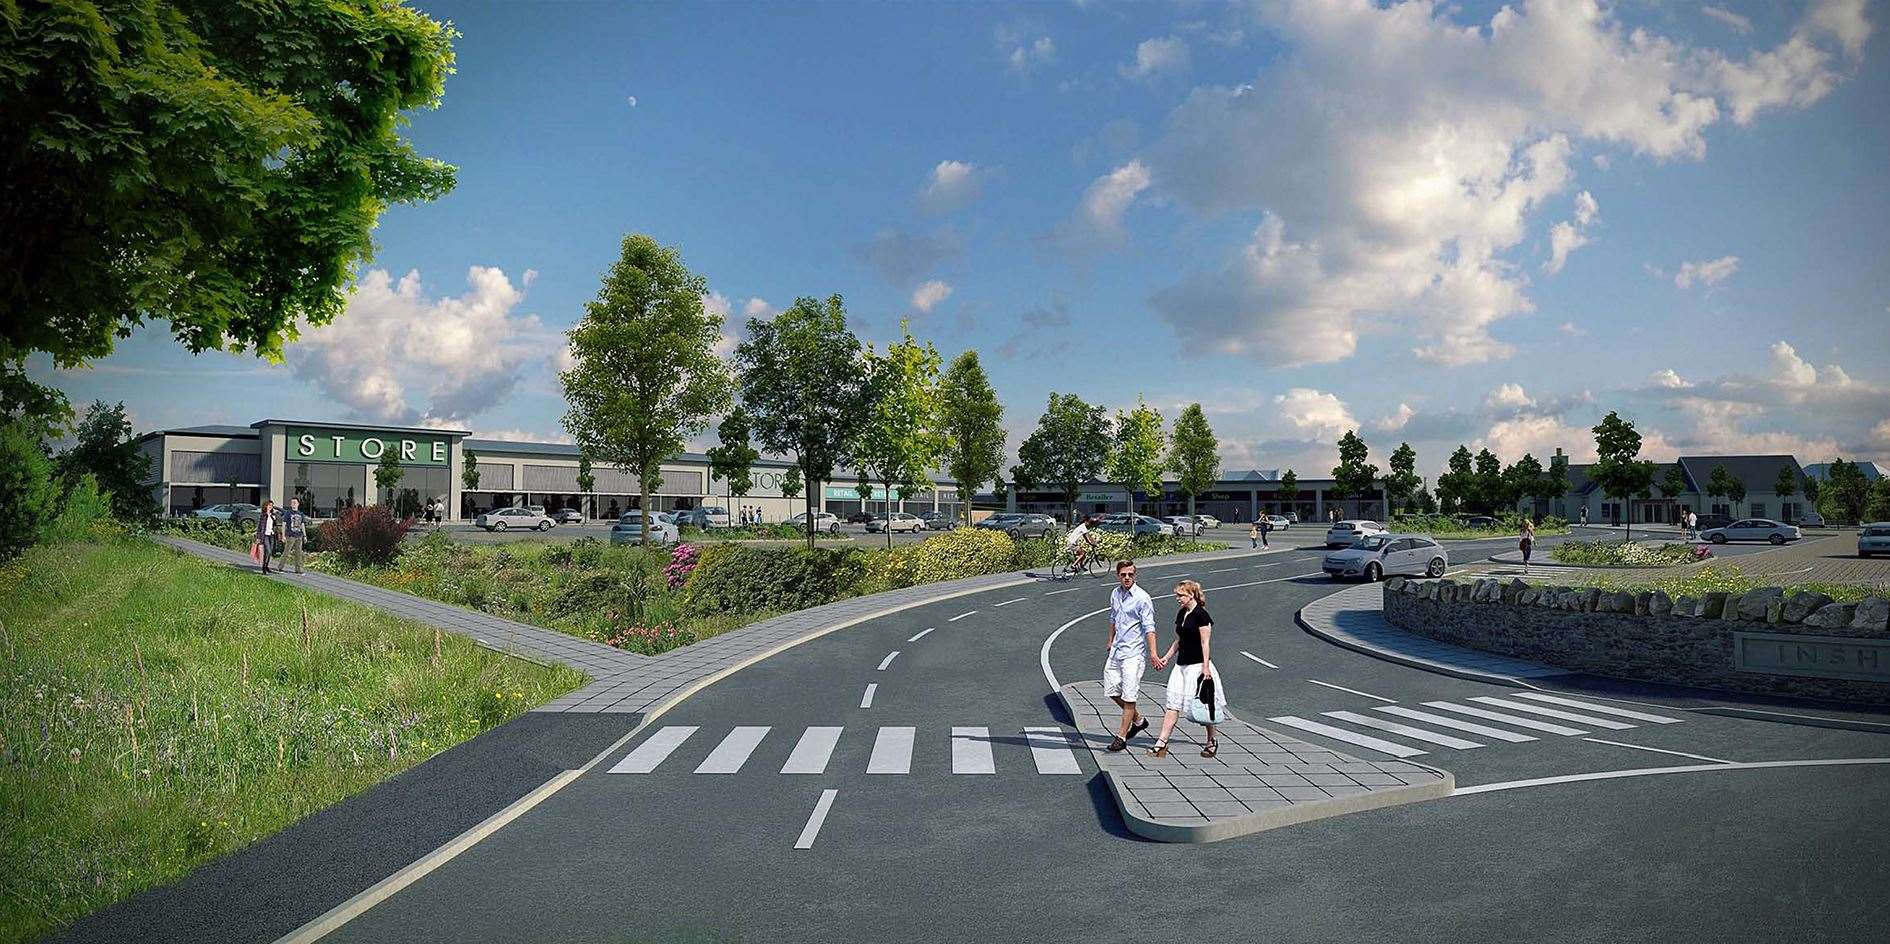 Council planners recommended refusal for the planned expansion of Inshes Retail Park in Inverness, warning that it would have 'a significantly adverse impact on the vitality and viability of Inverness City Centre'.